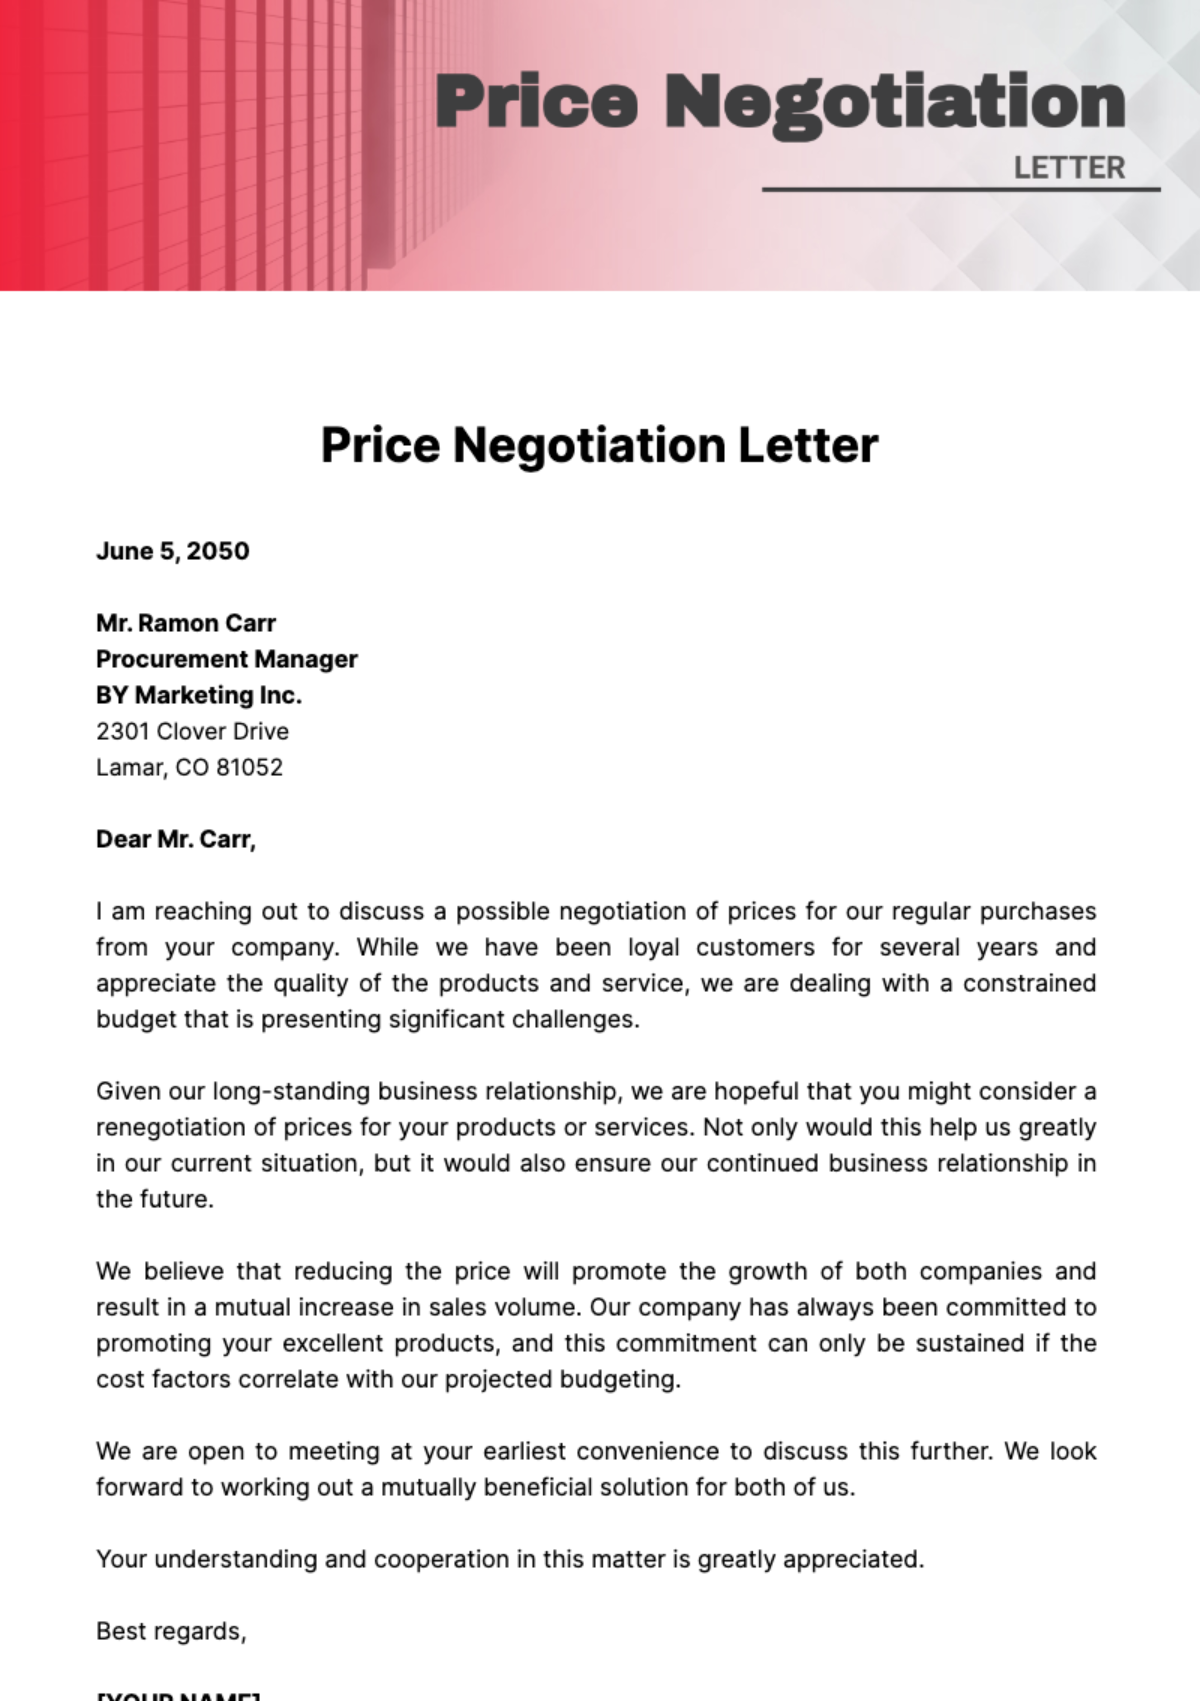 Price Negotiation Letter Template